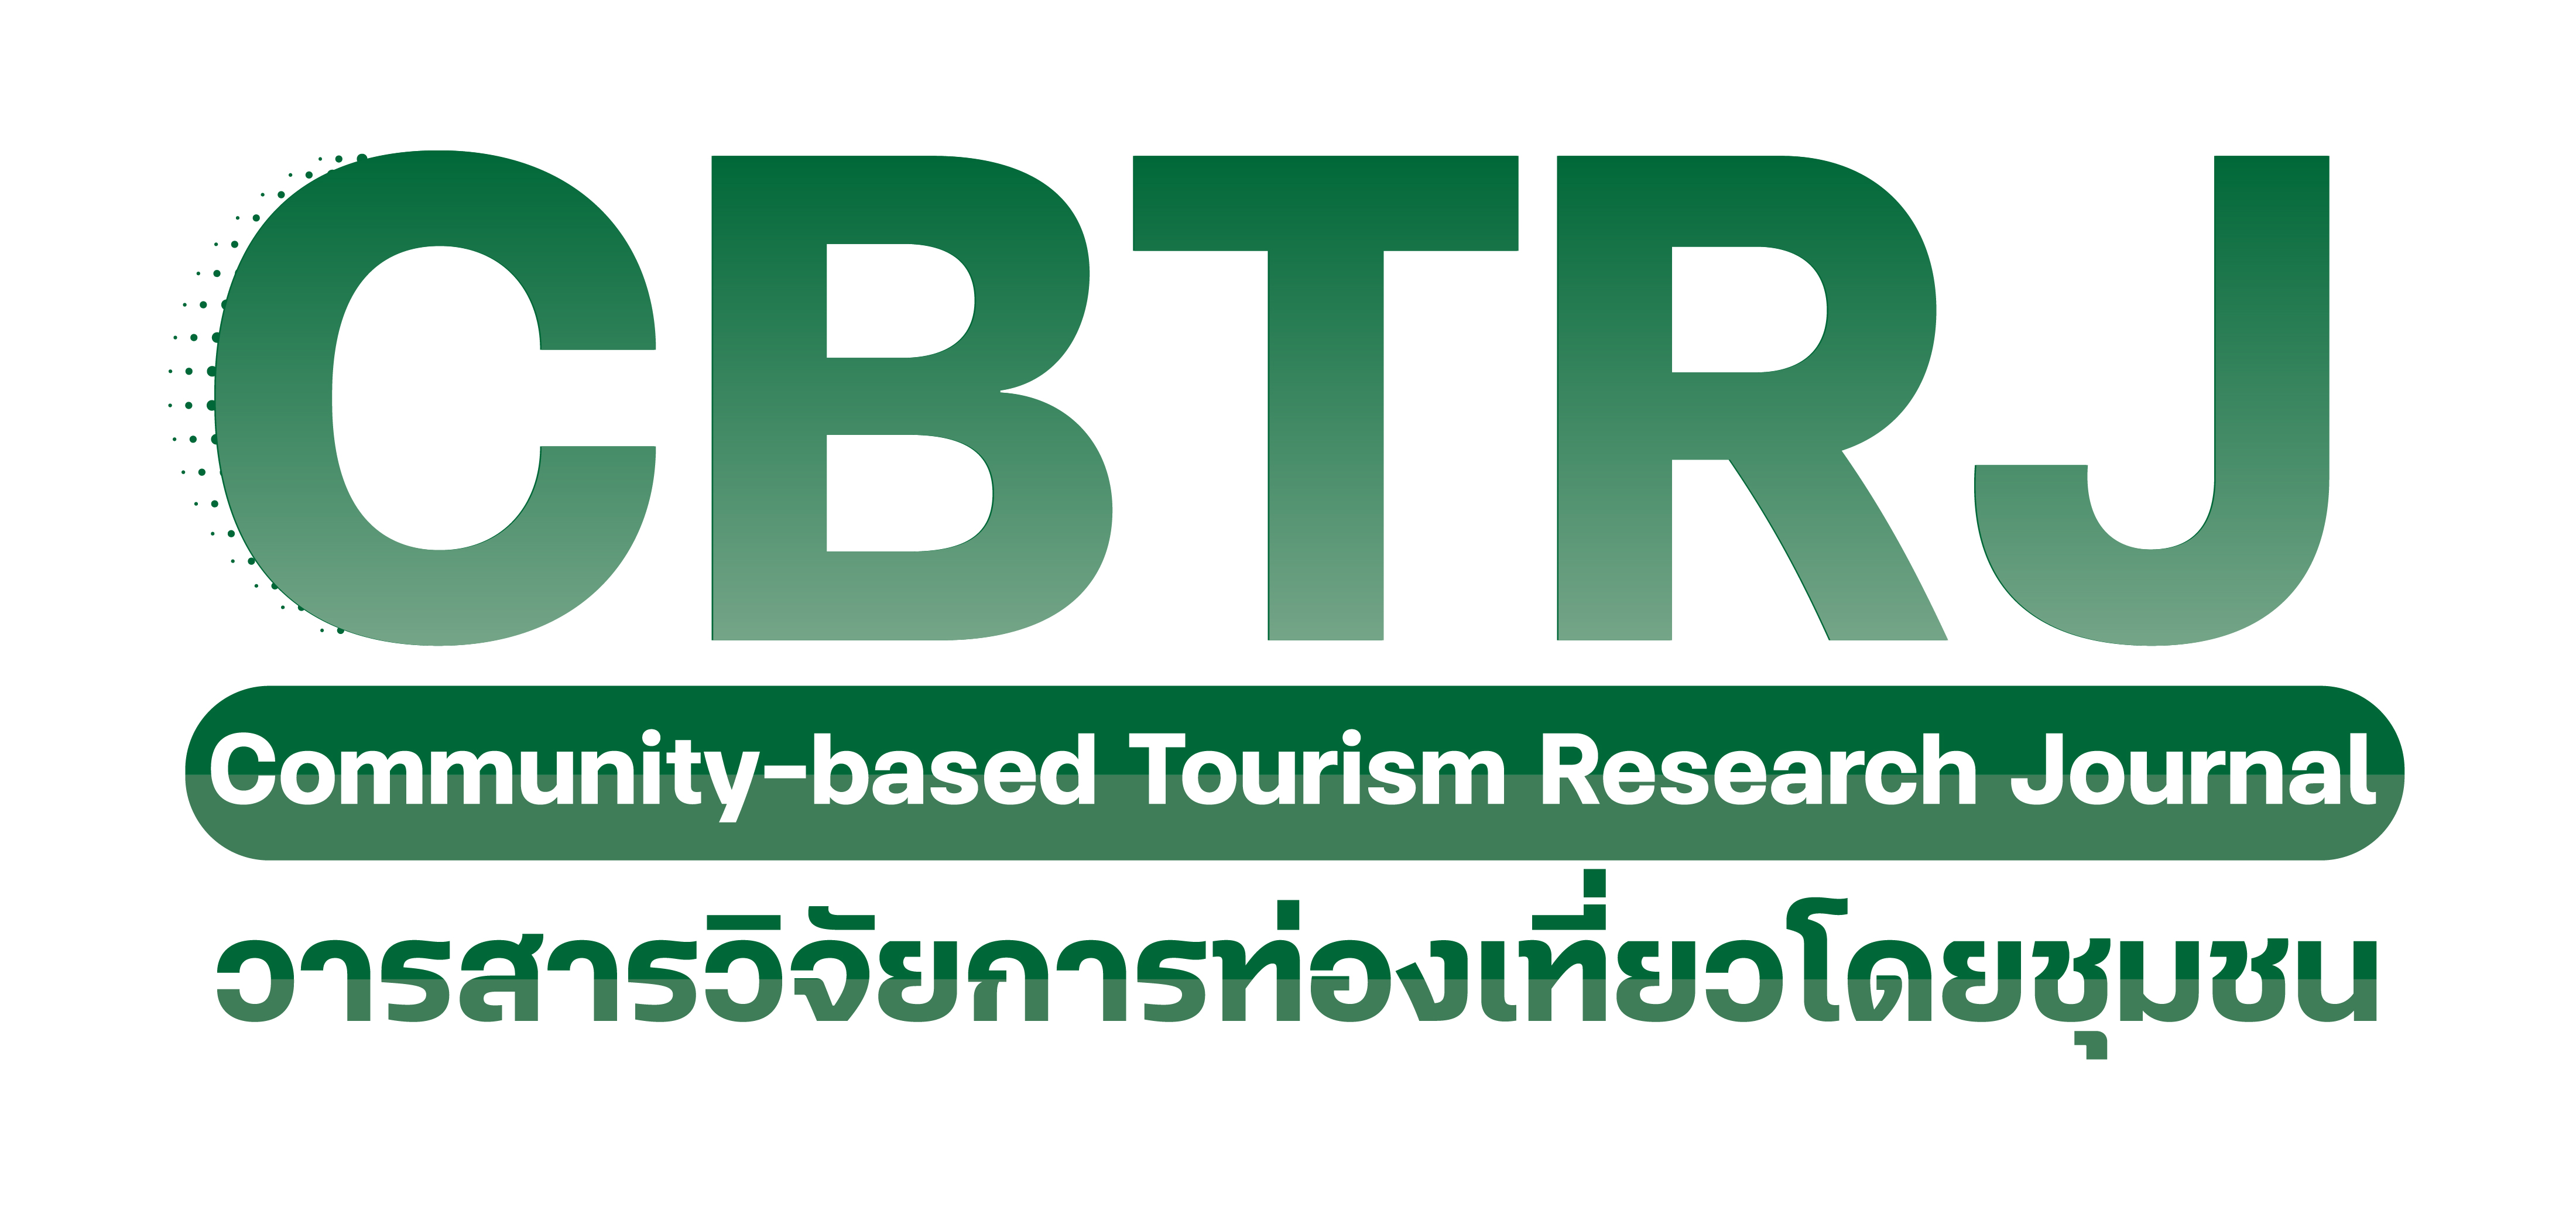 Community-based Tourism Research Journal